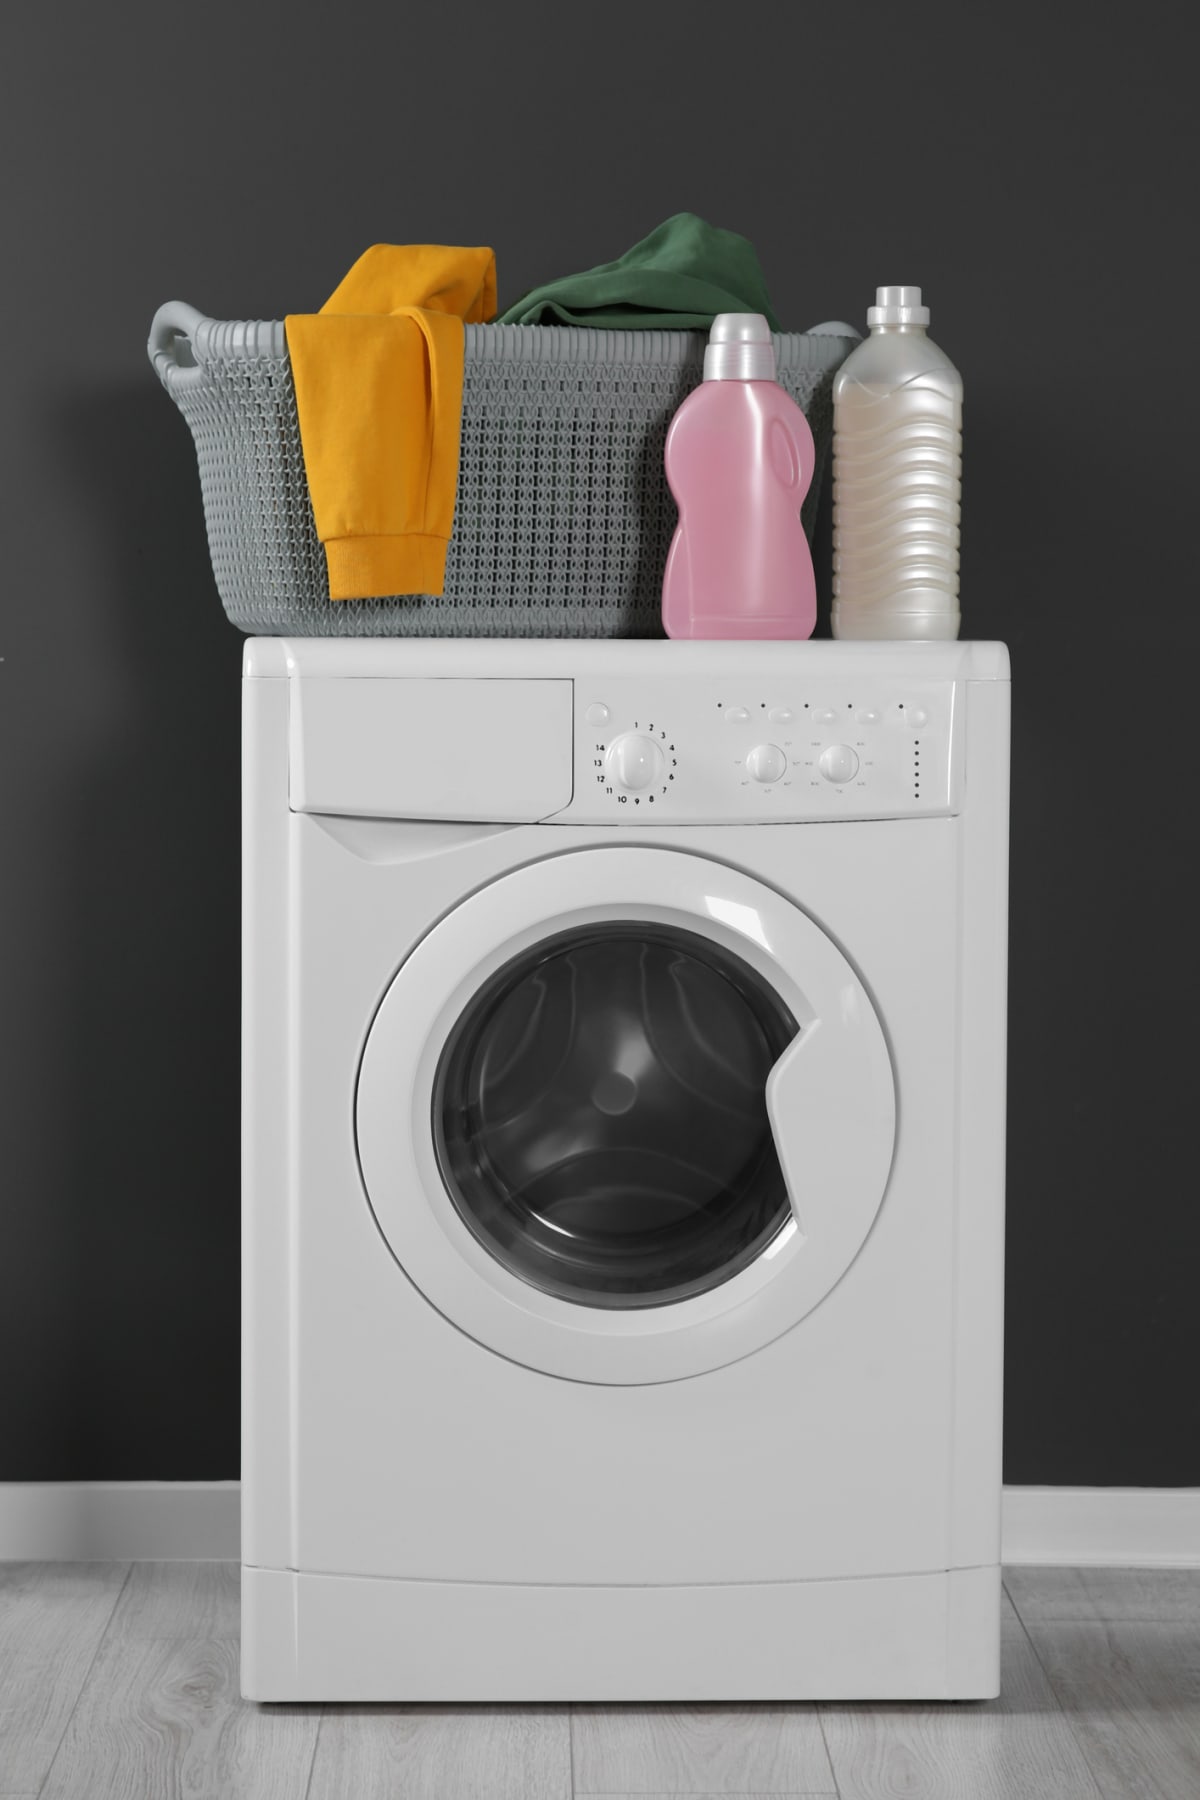 Washing machine with clothes and detergents near black wall indoors. Interior design.